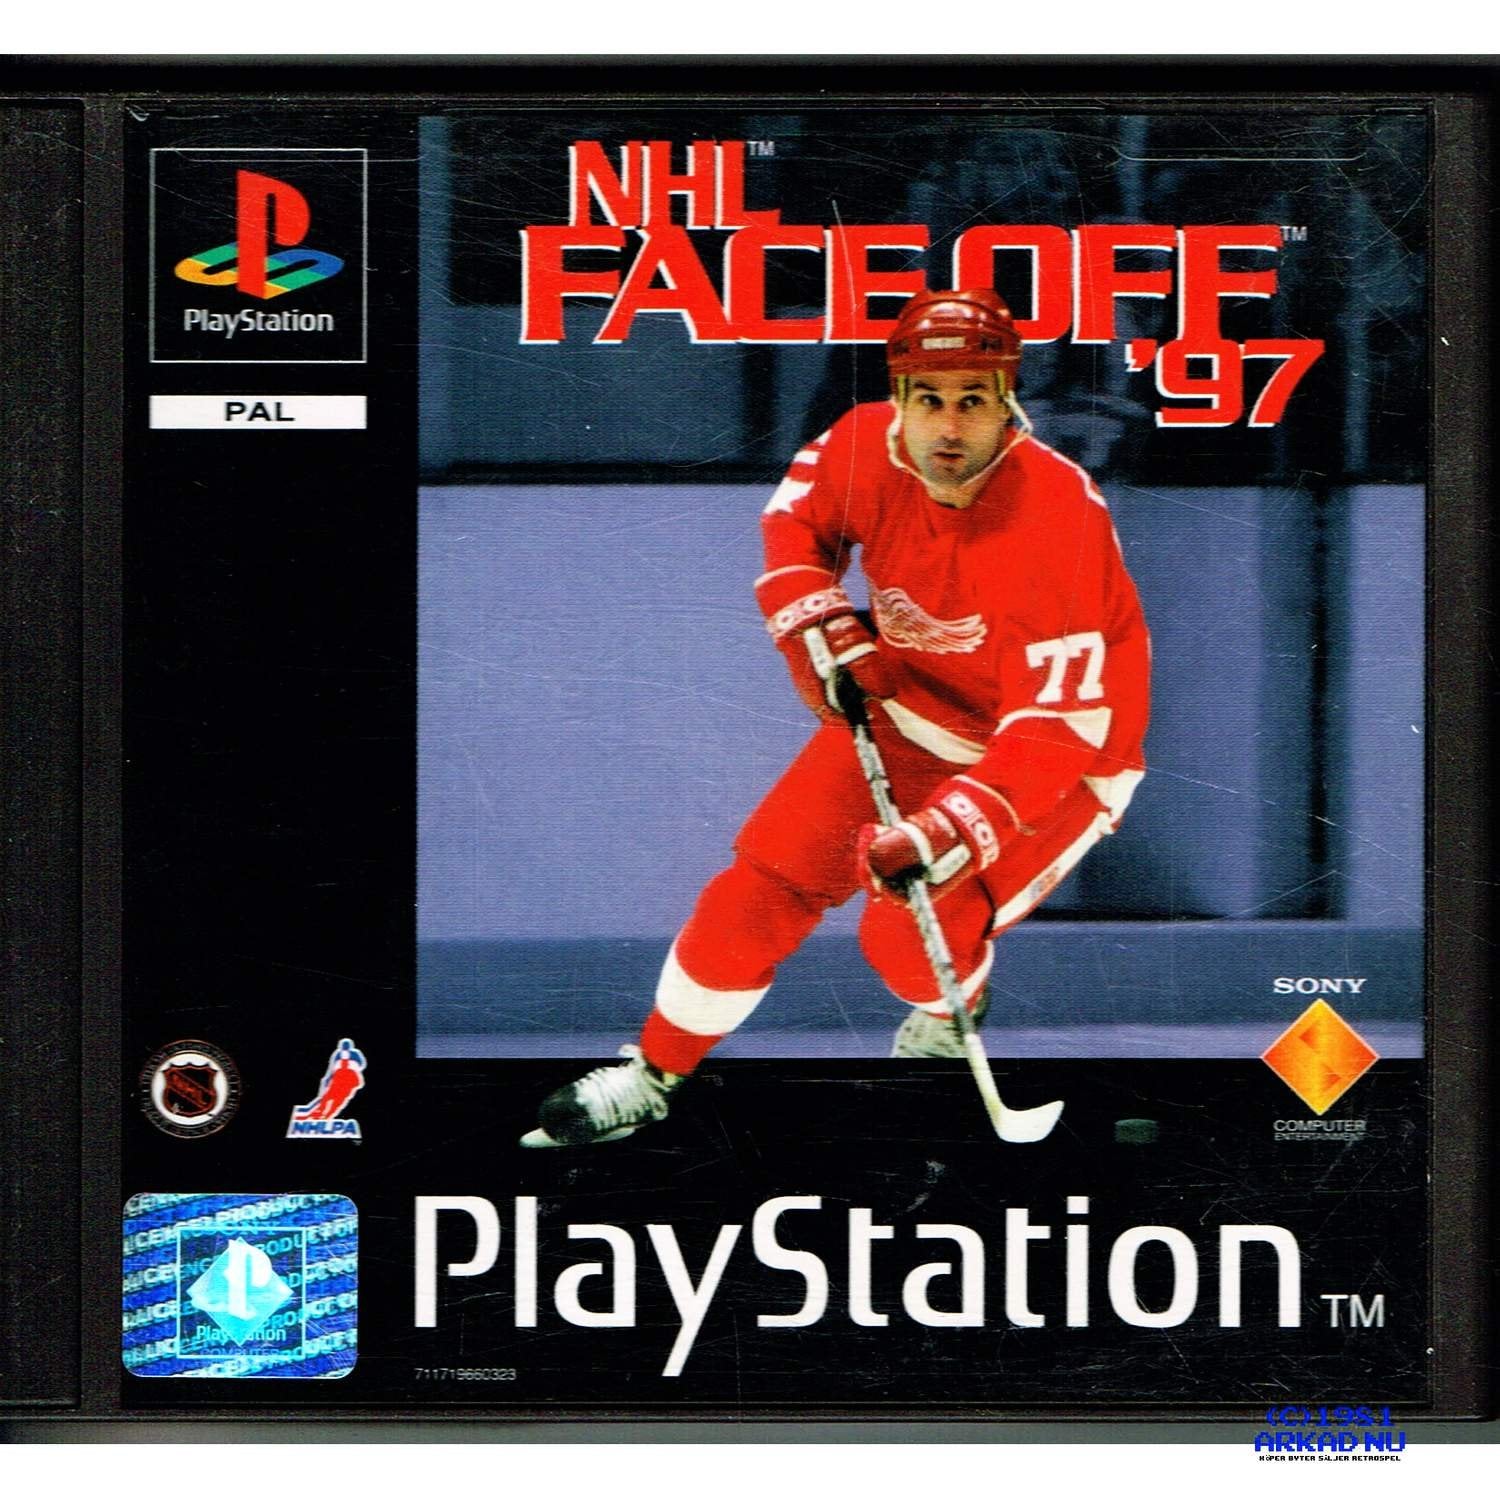 Game | Sony Playstation PS1 | NHL FaceOff '97